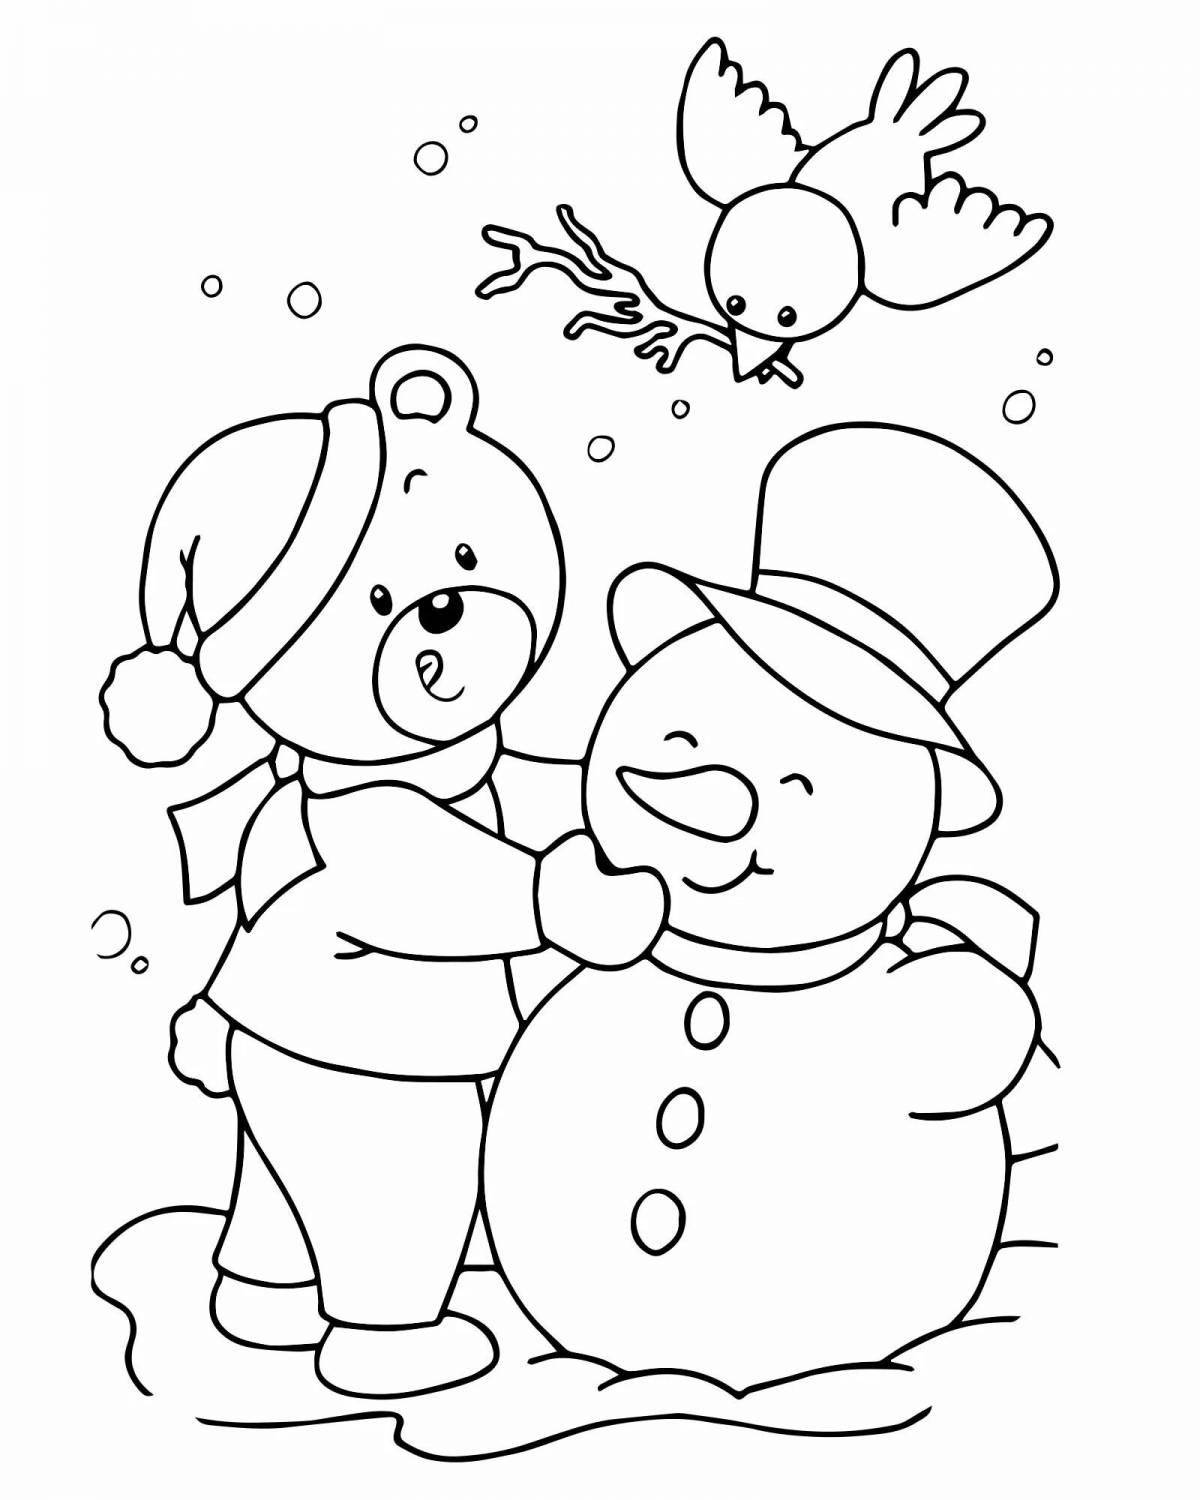 Whimsical winter coloring card